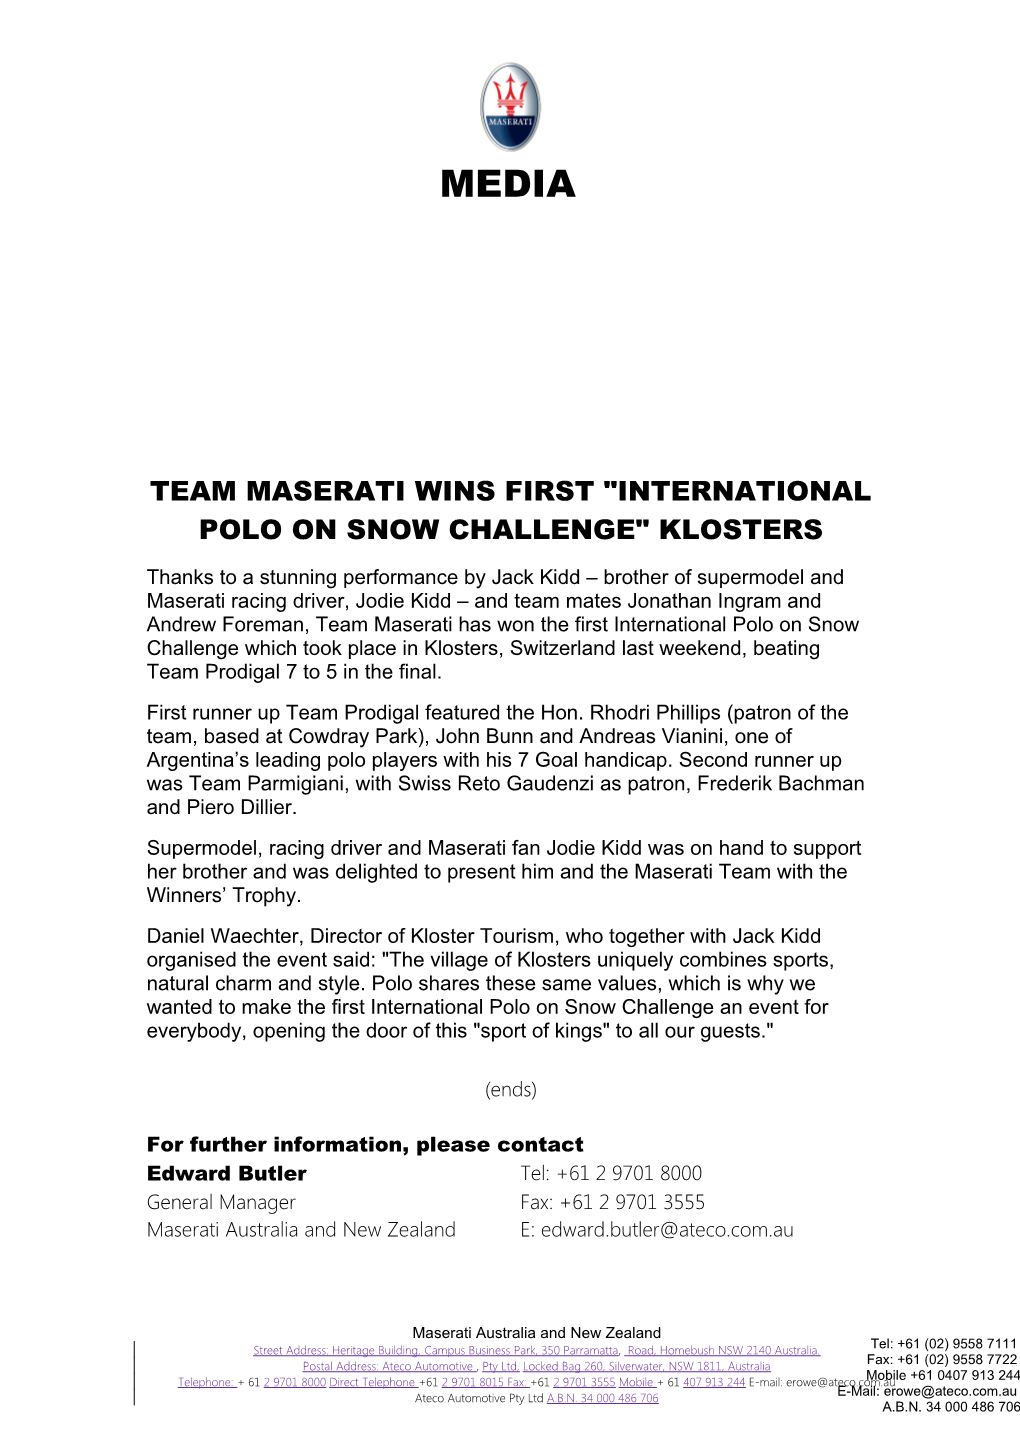 Team Maserati Wins First International Polo on Snow Challenge Klosters